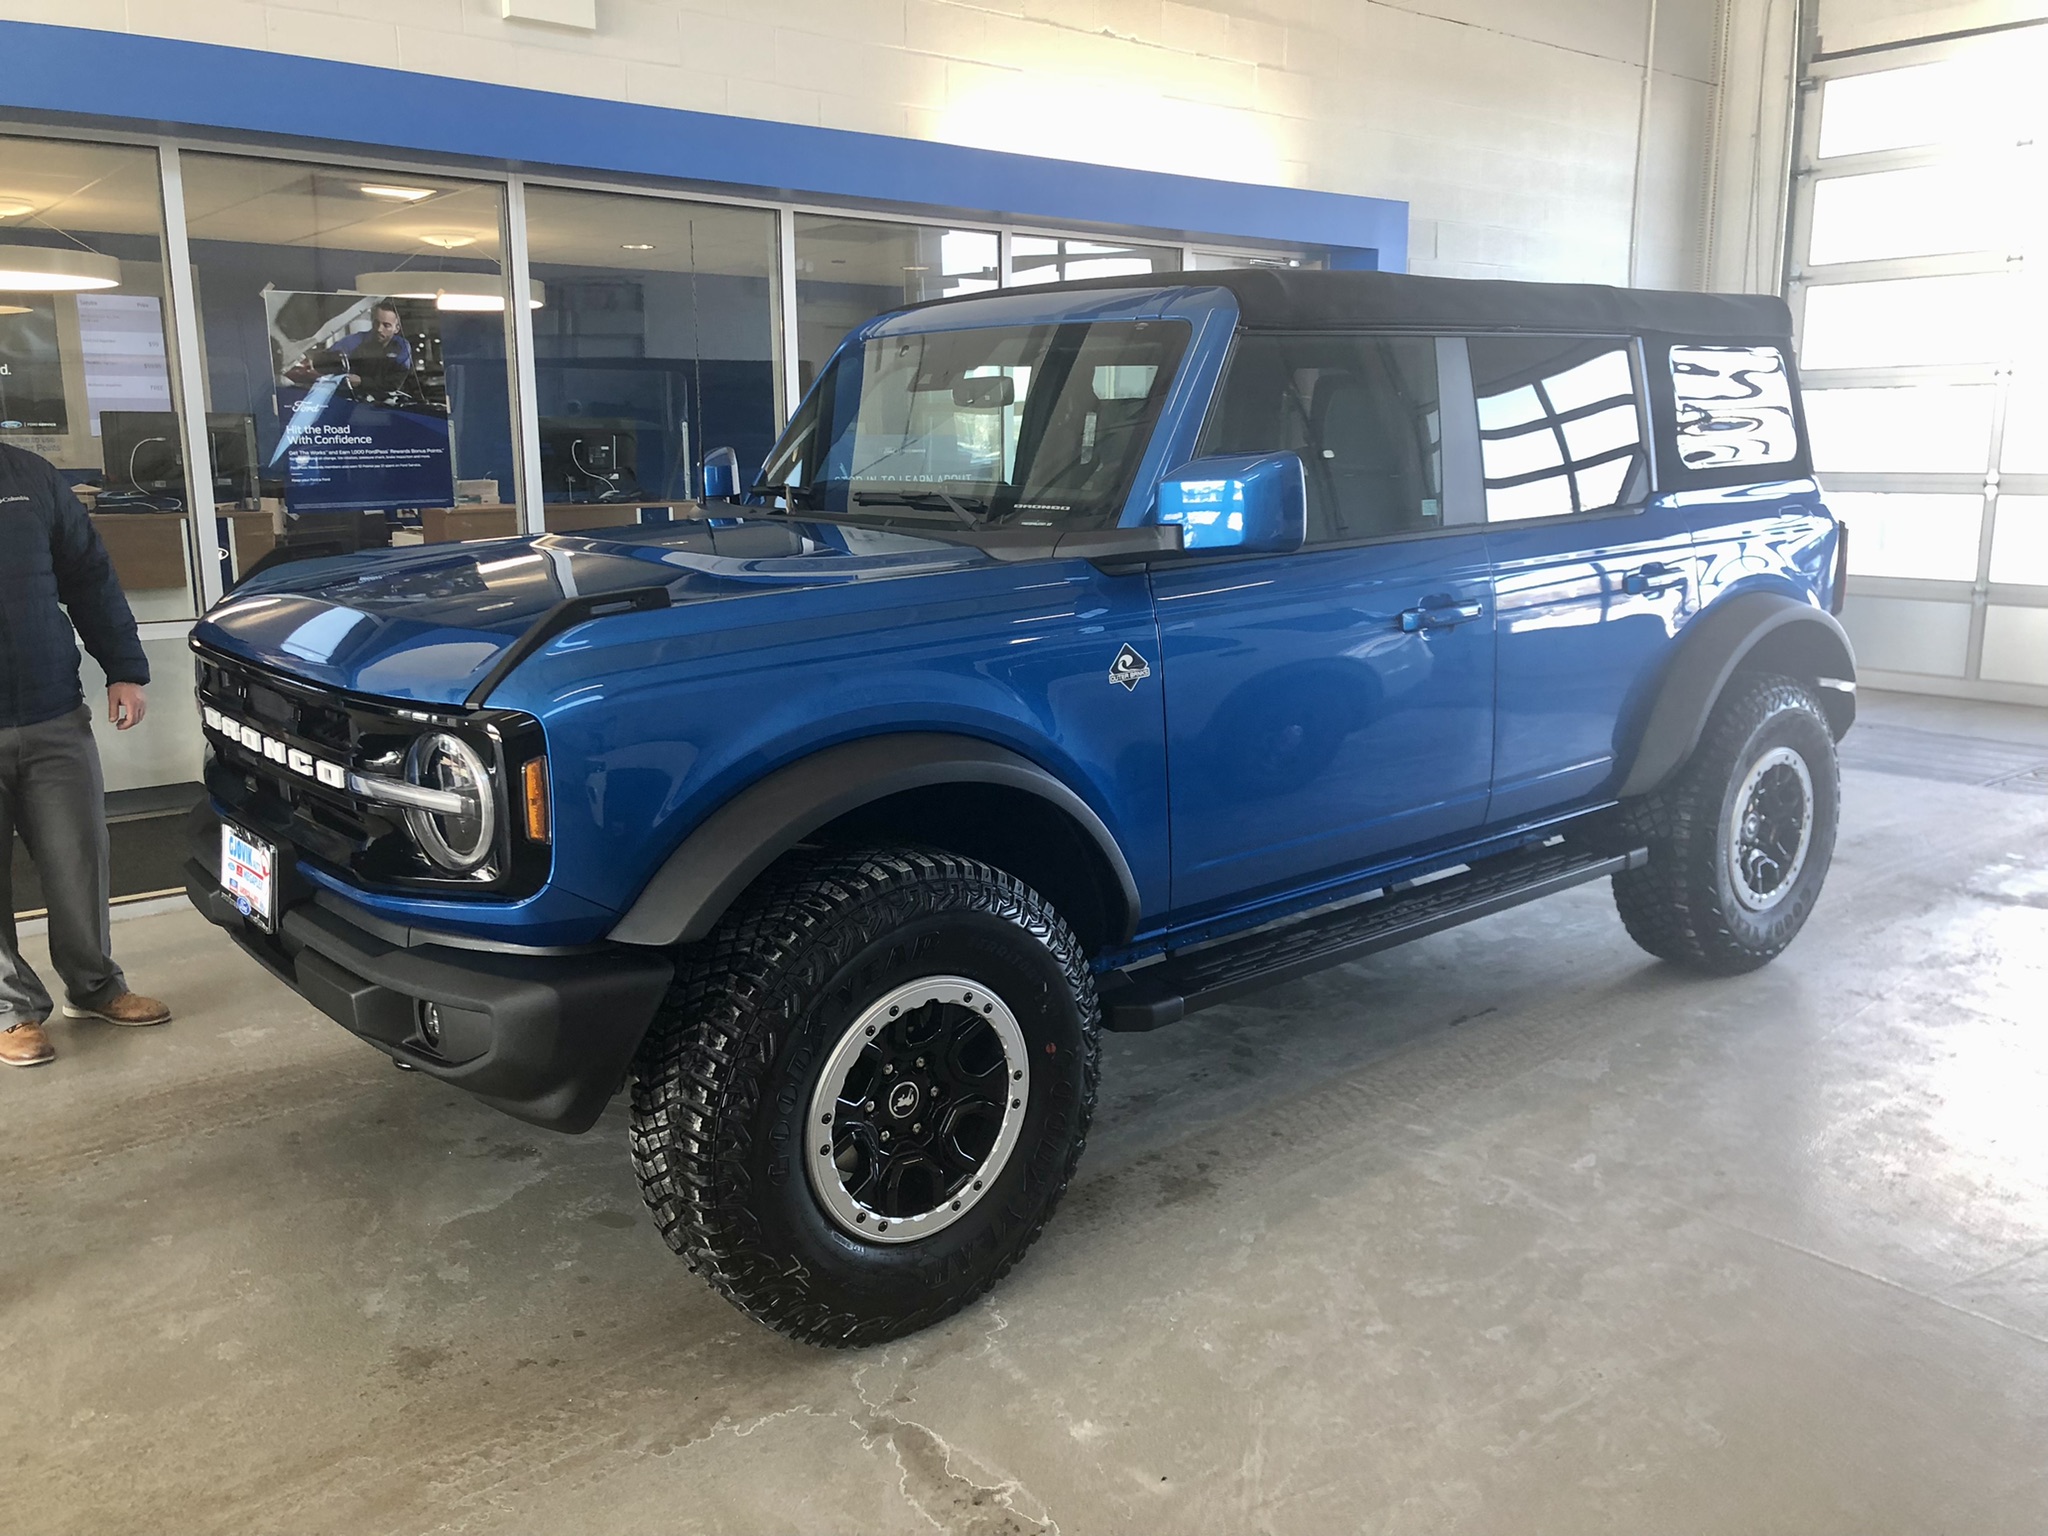 Ford Bronco Let's see your favorite Bronco picture of 2022 📸 799BB844-BAB5-476D-9084-8807901E37FF